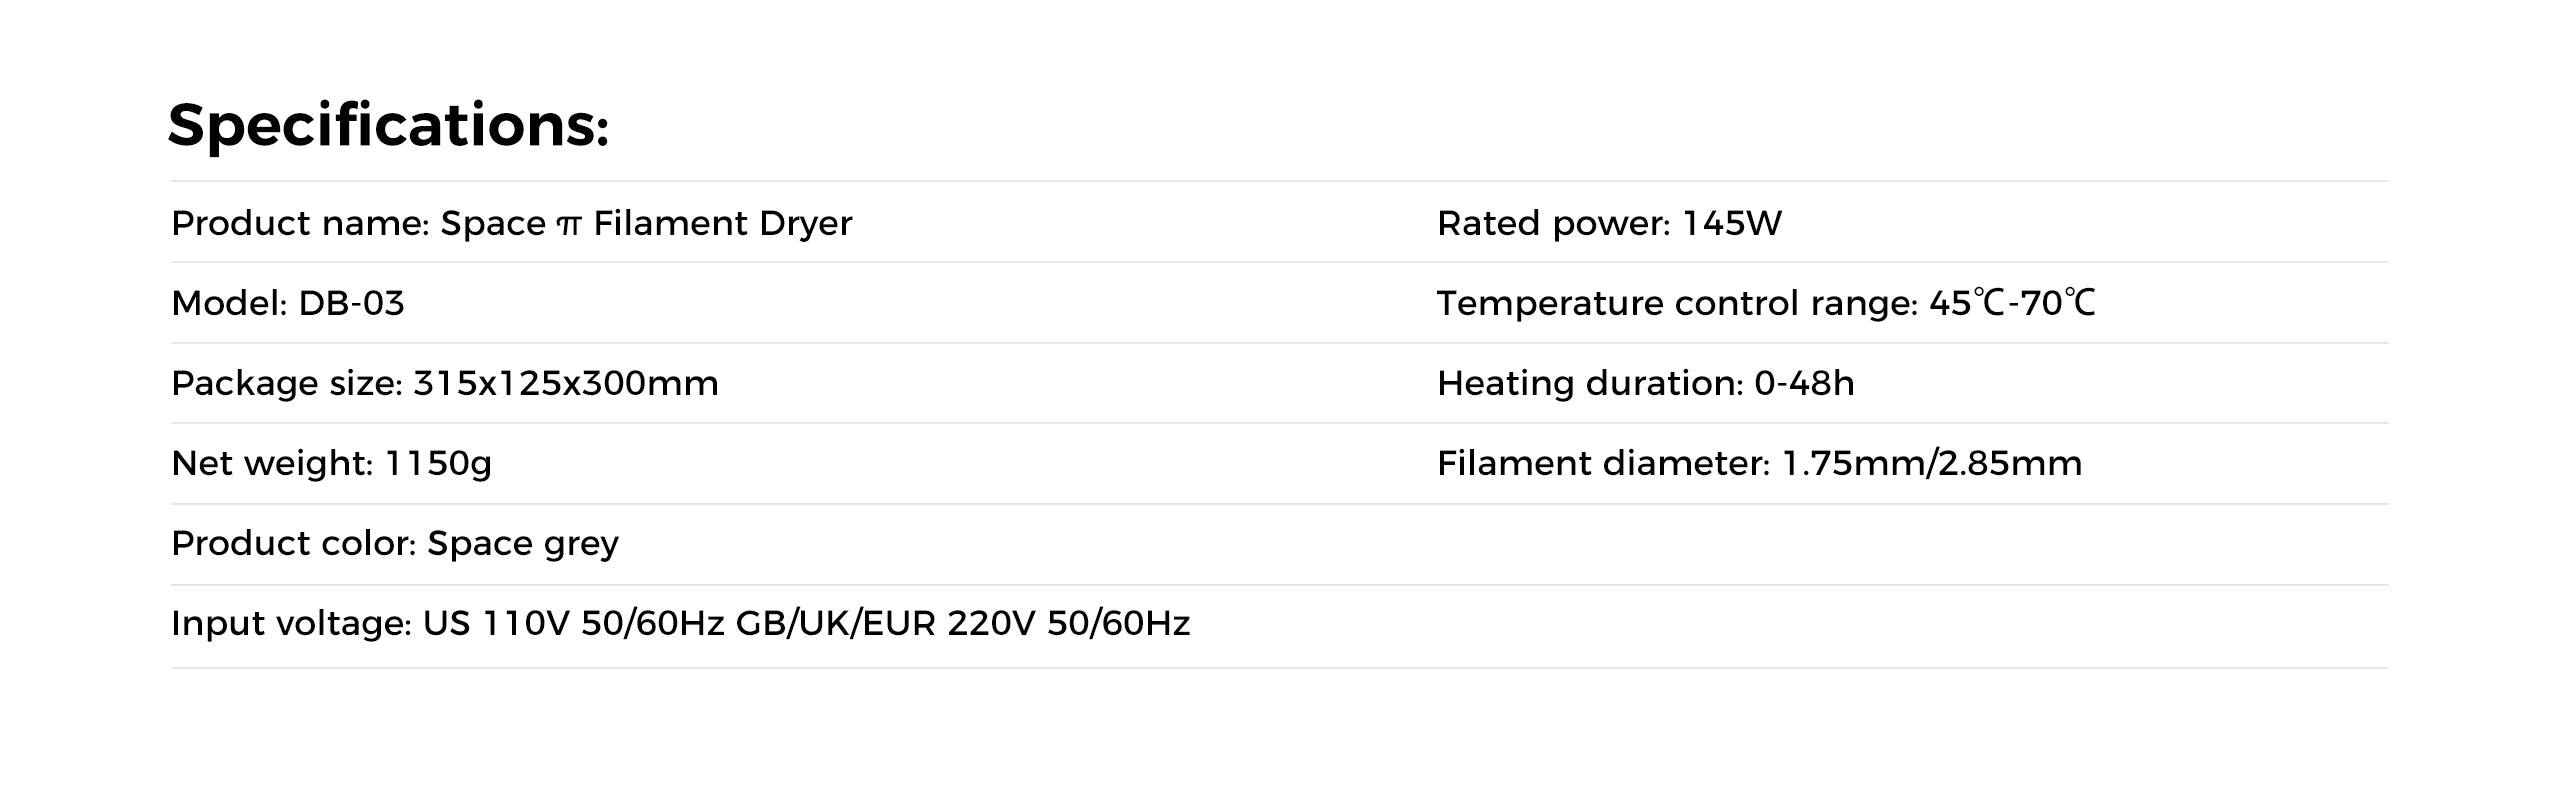 Creality space pi filament dryer specifications